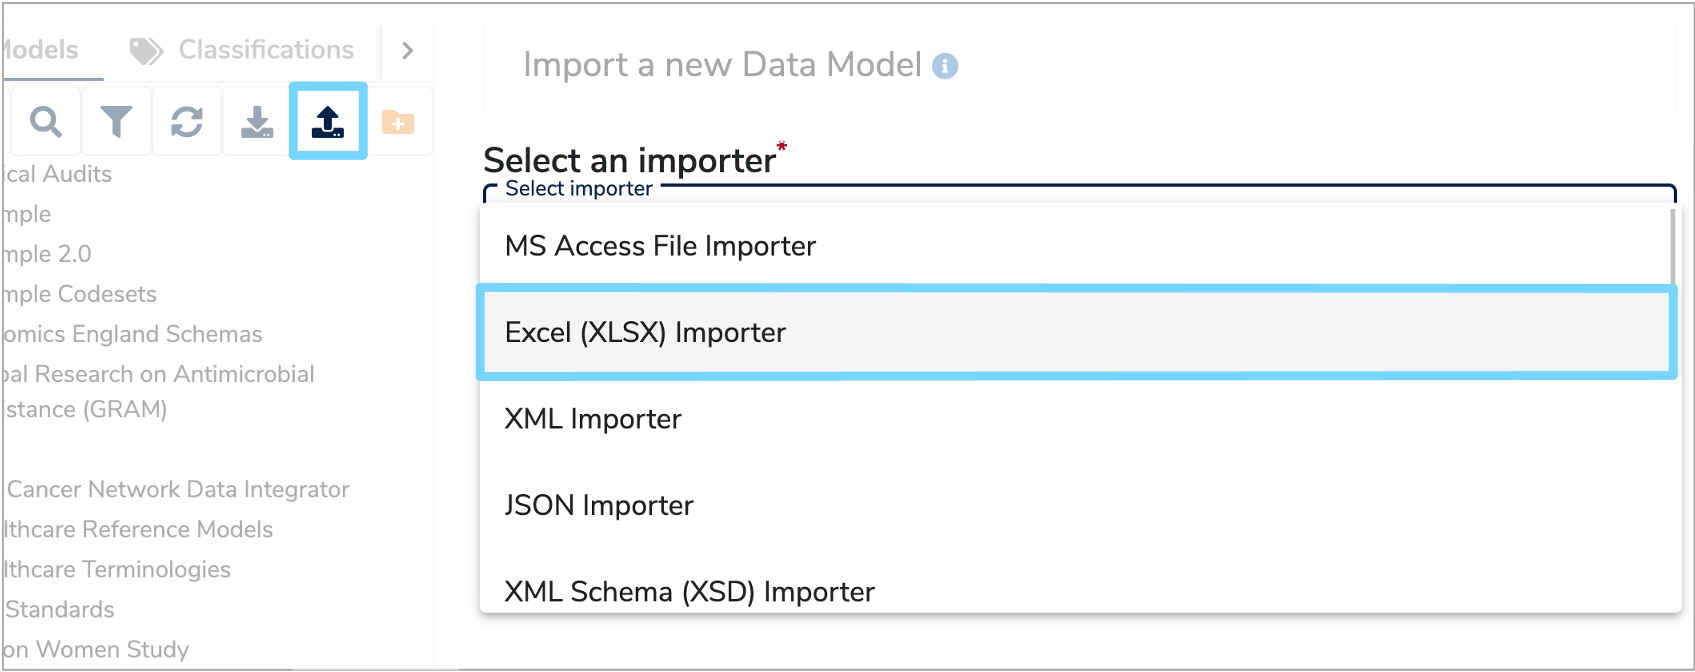 Section 1 of the Data Model import form